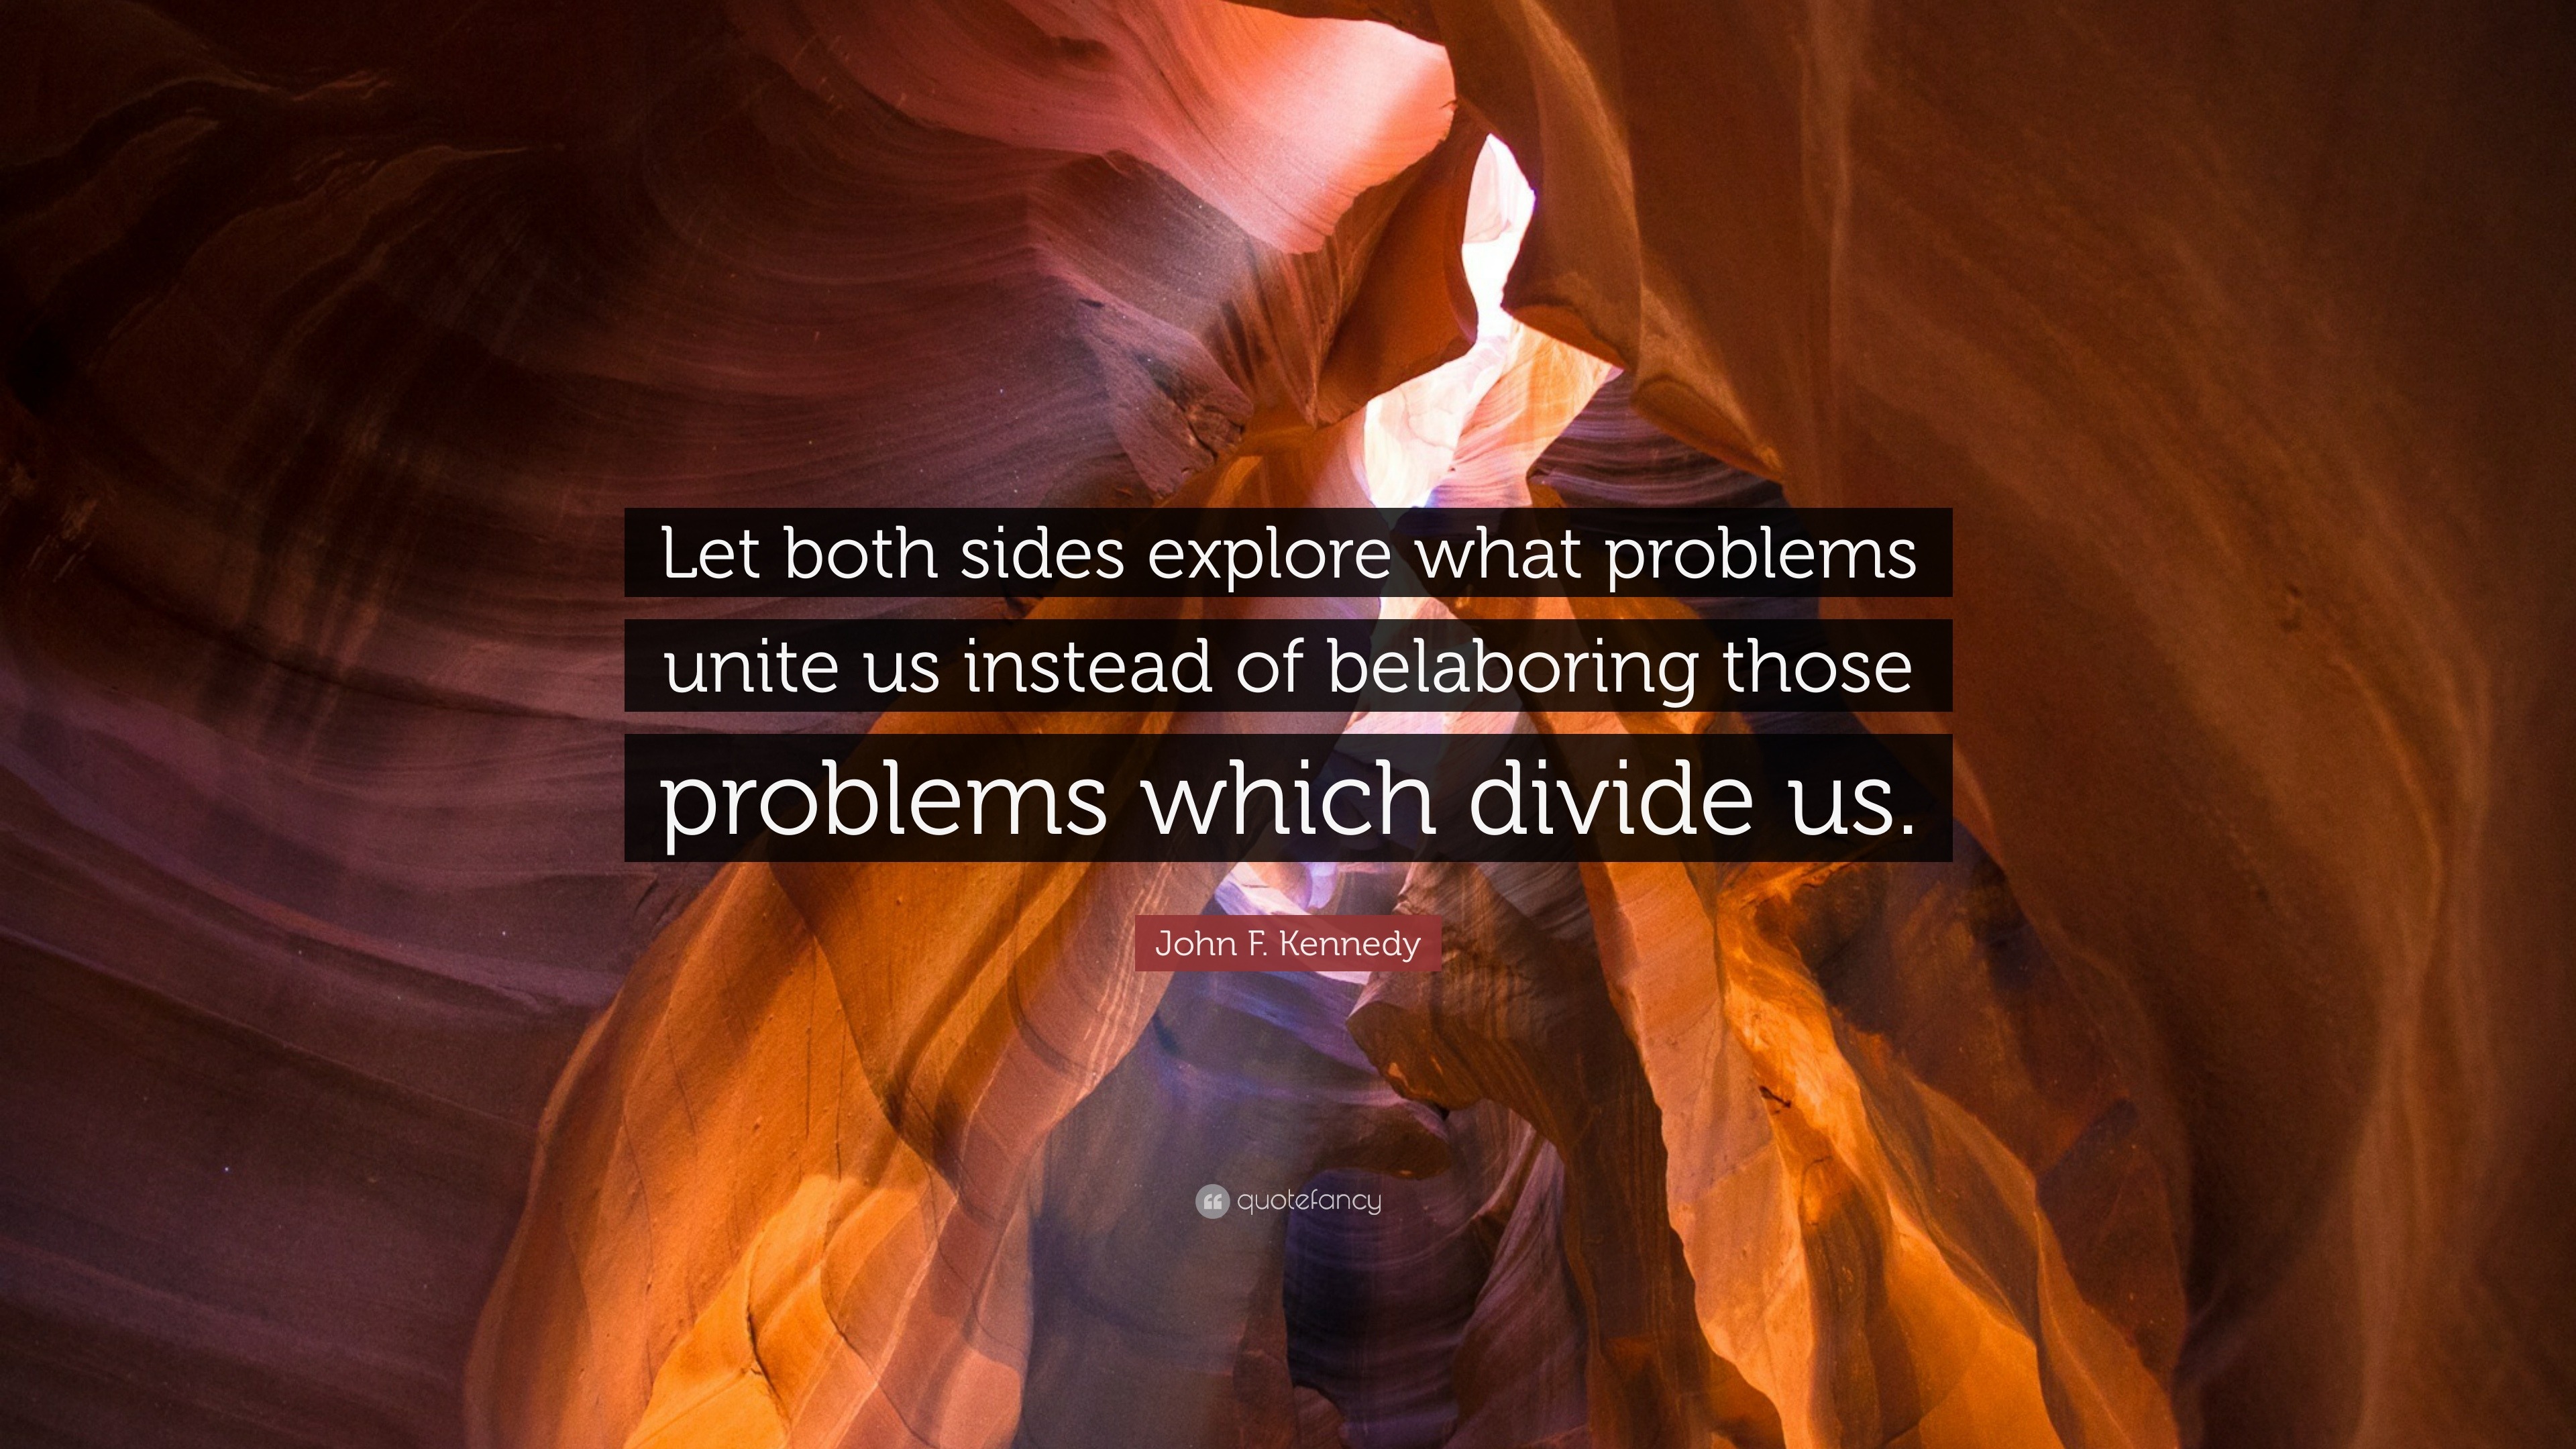 https://quotefancy.com/media/wallpaper/3840x2160/74450-John-F-Kennedy-Quote-Let-both-sides-explore-what-problems-unite-us.jpg